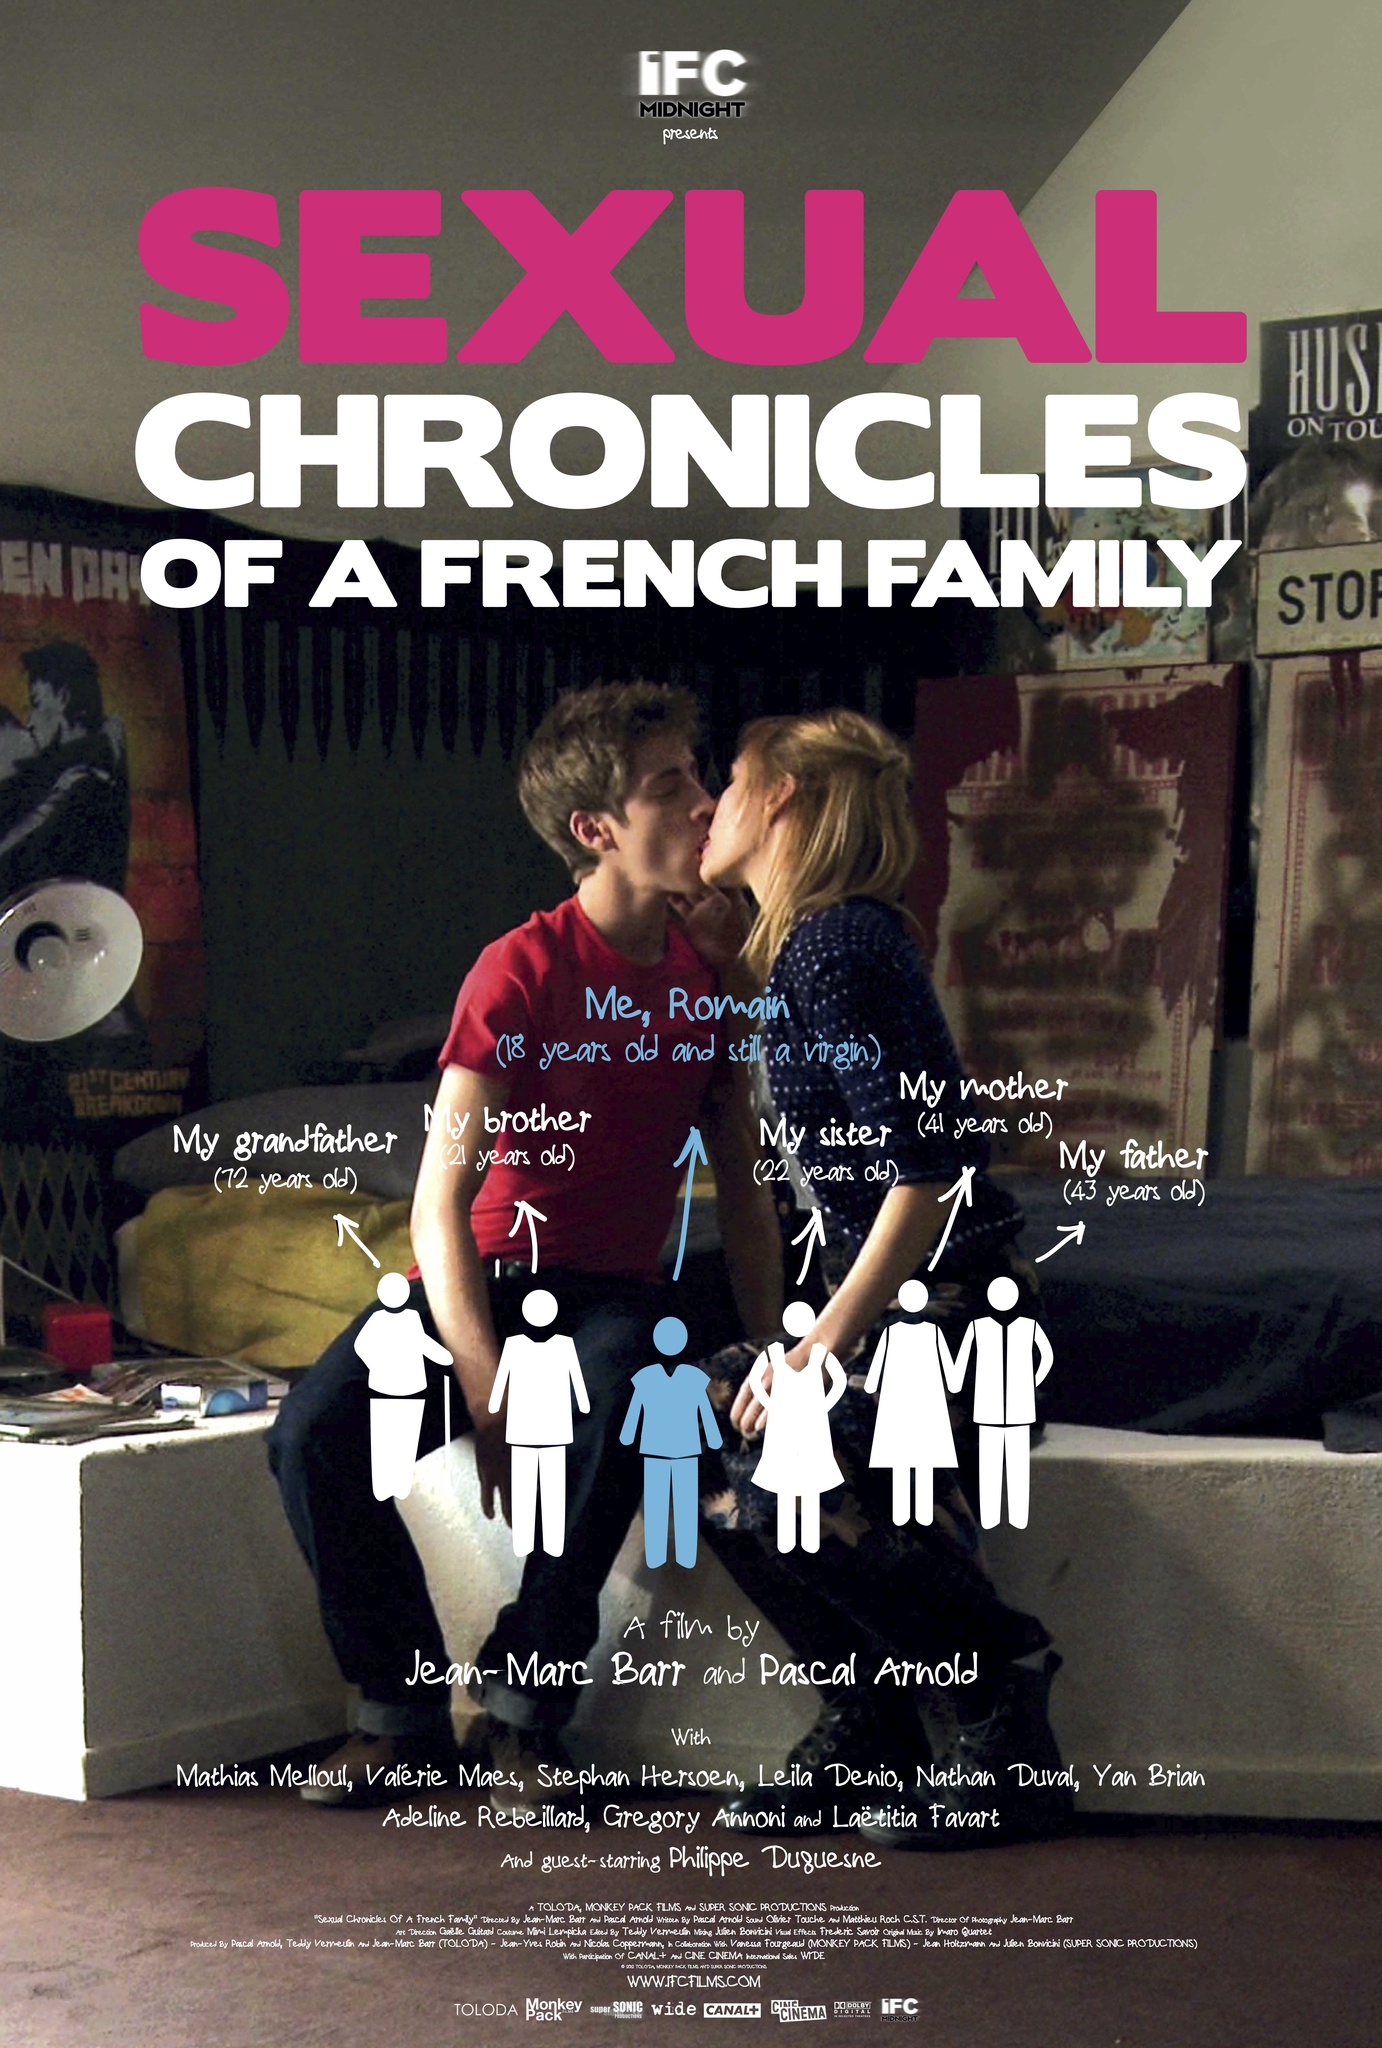 Sexual Chronicles of a French Family 2012 фильм обнаженные сцены